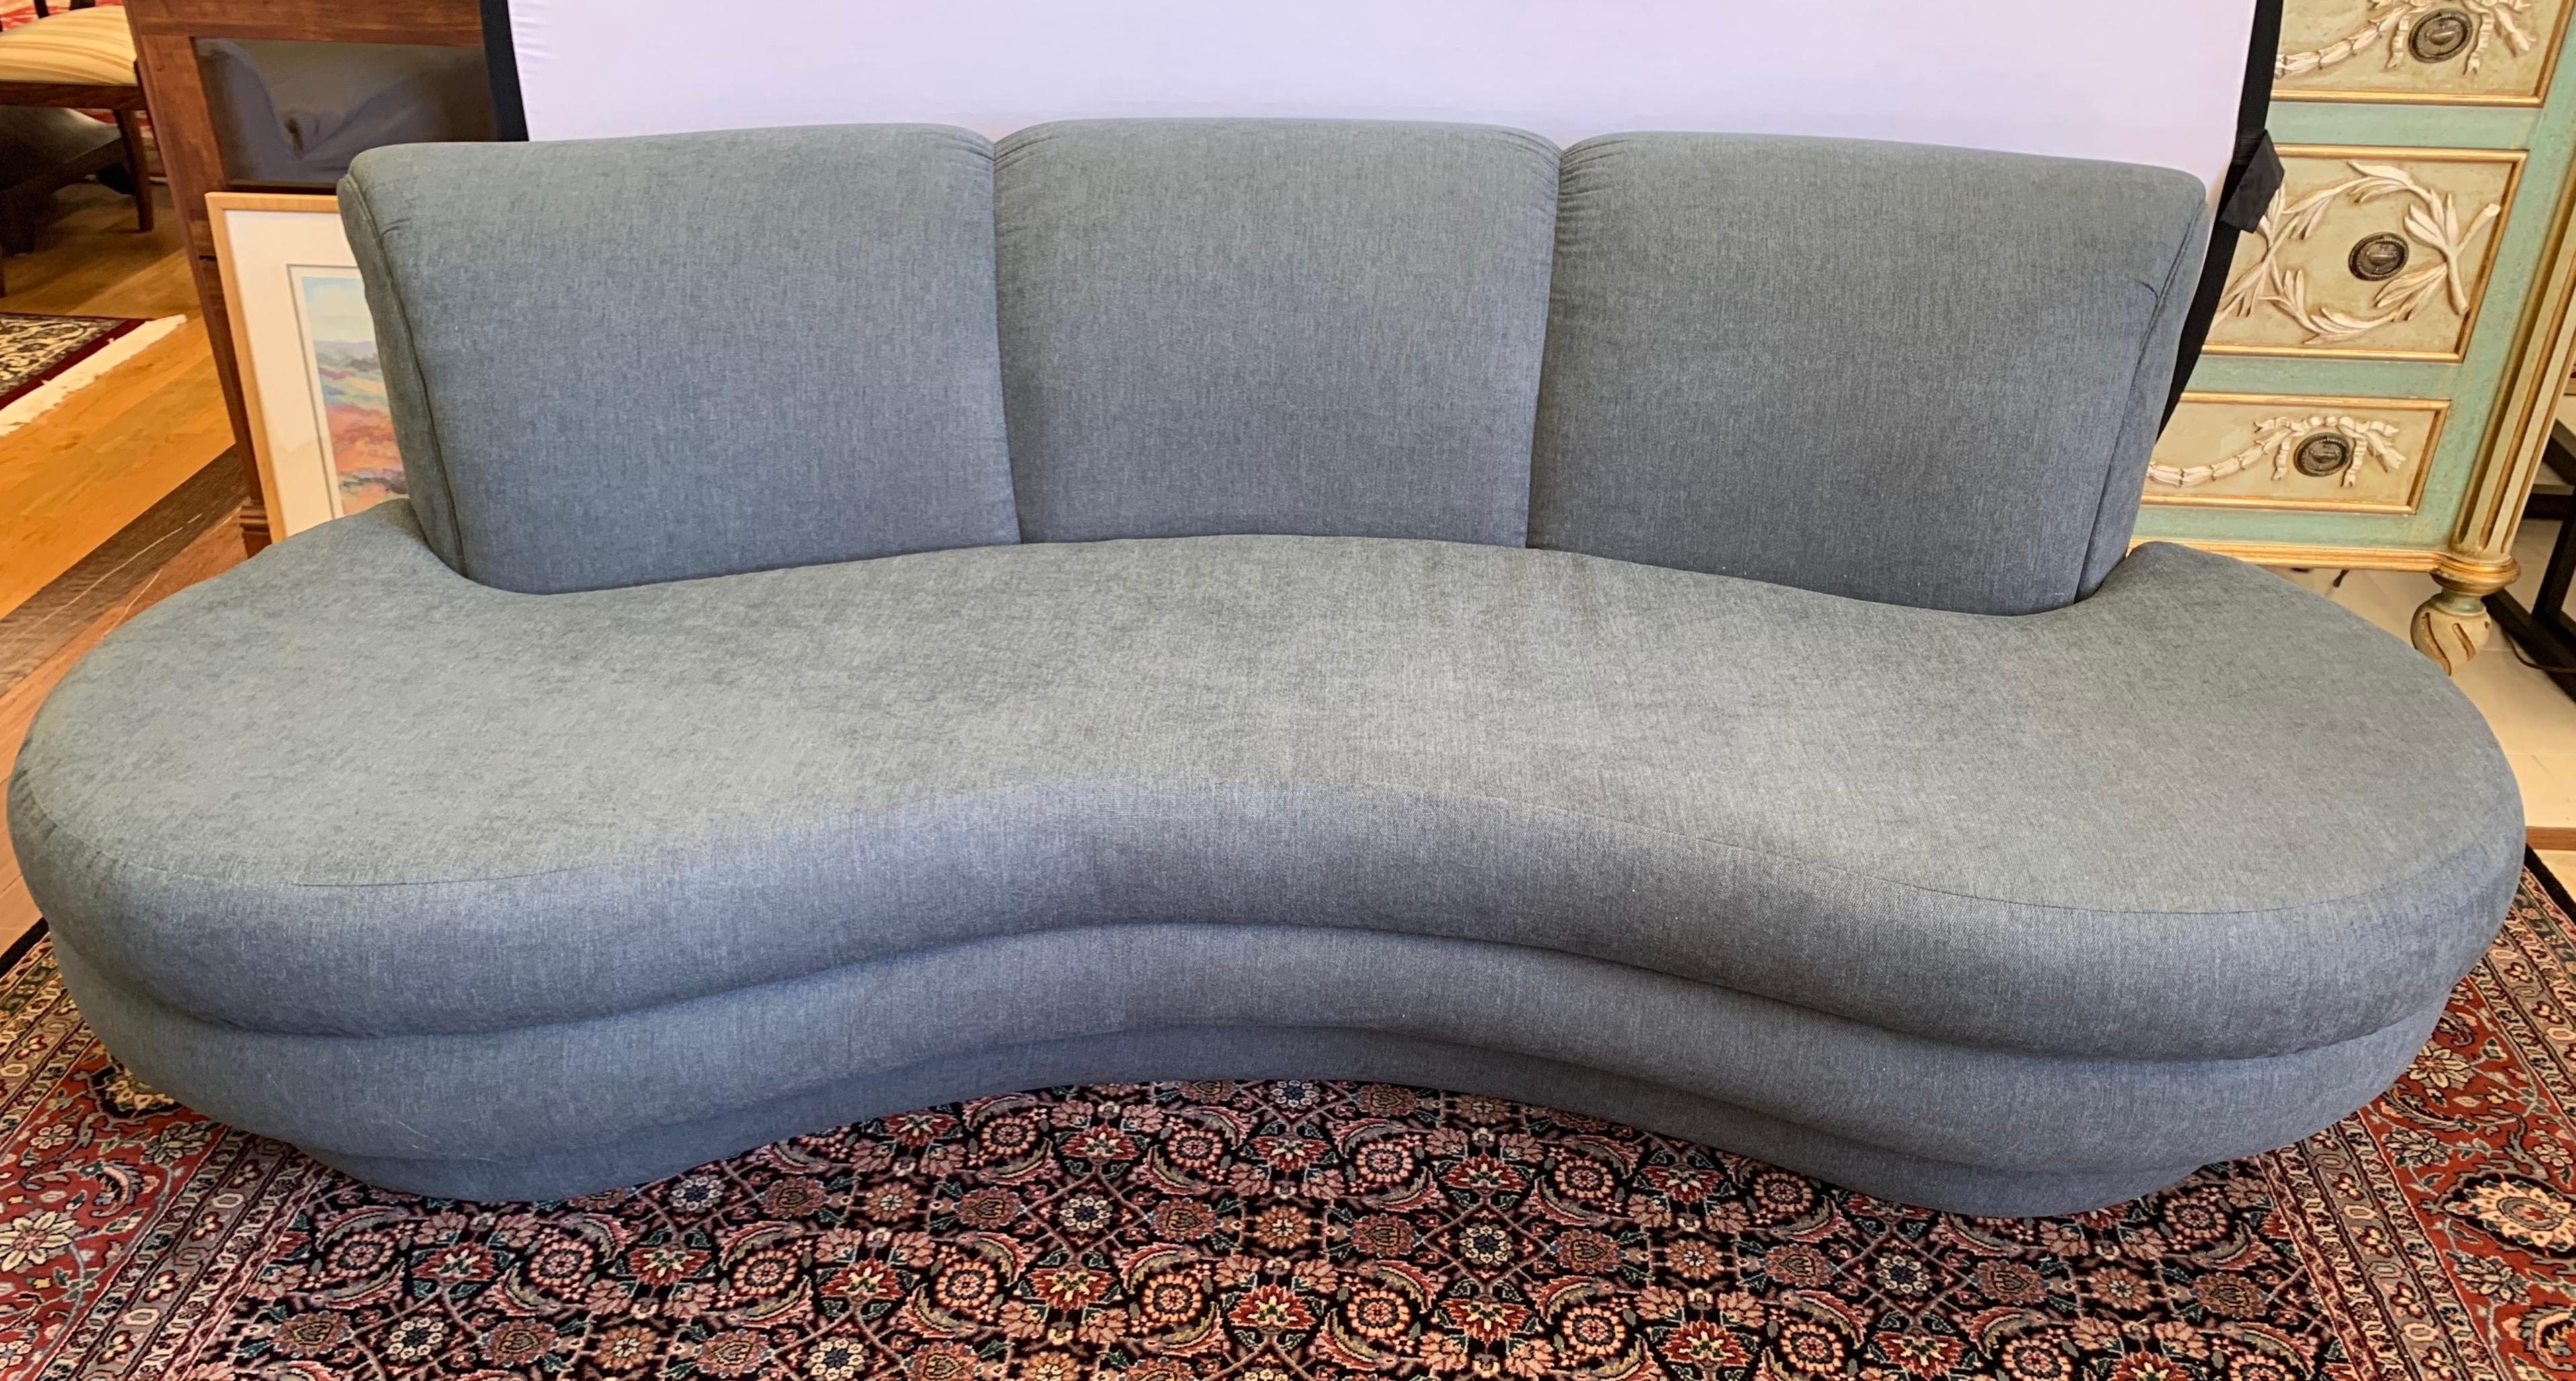 Matching Pearsall Comfort Design Cloud Sofas New Upholstered in Slate Gray, Pair In Good Condition In West Hartford, CT